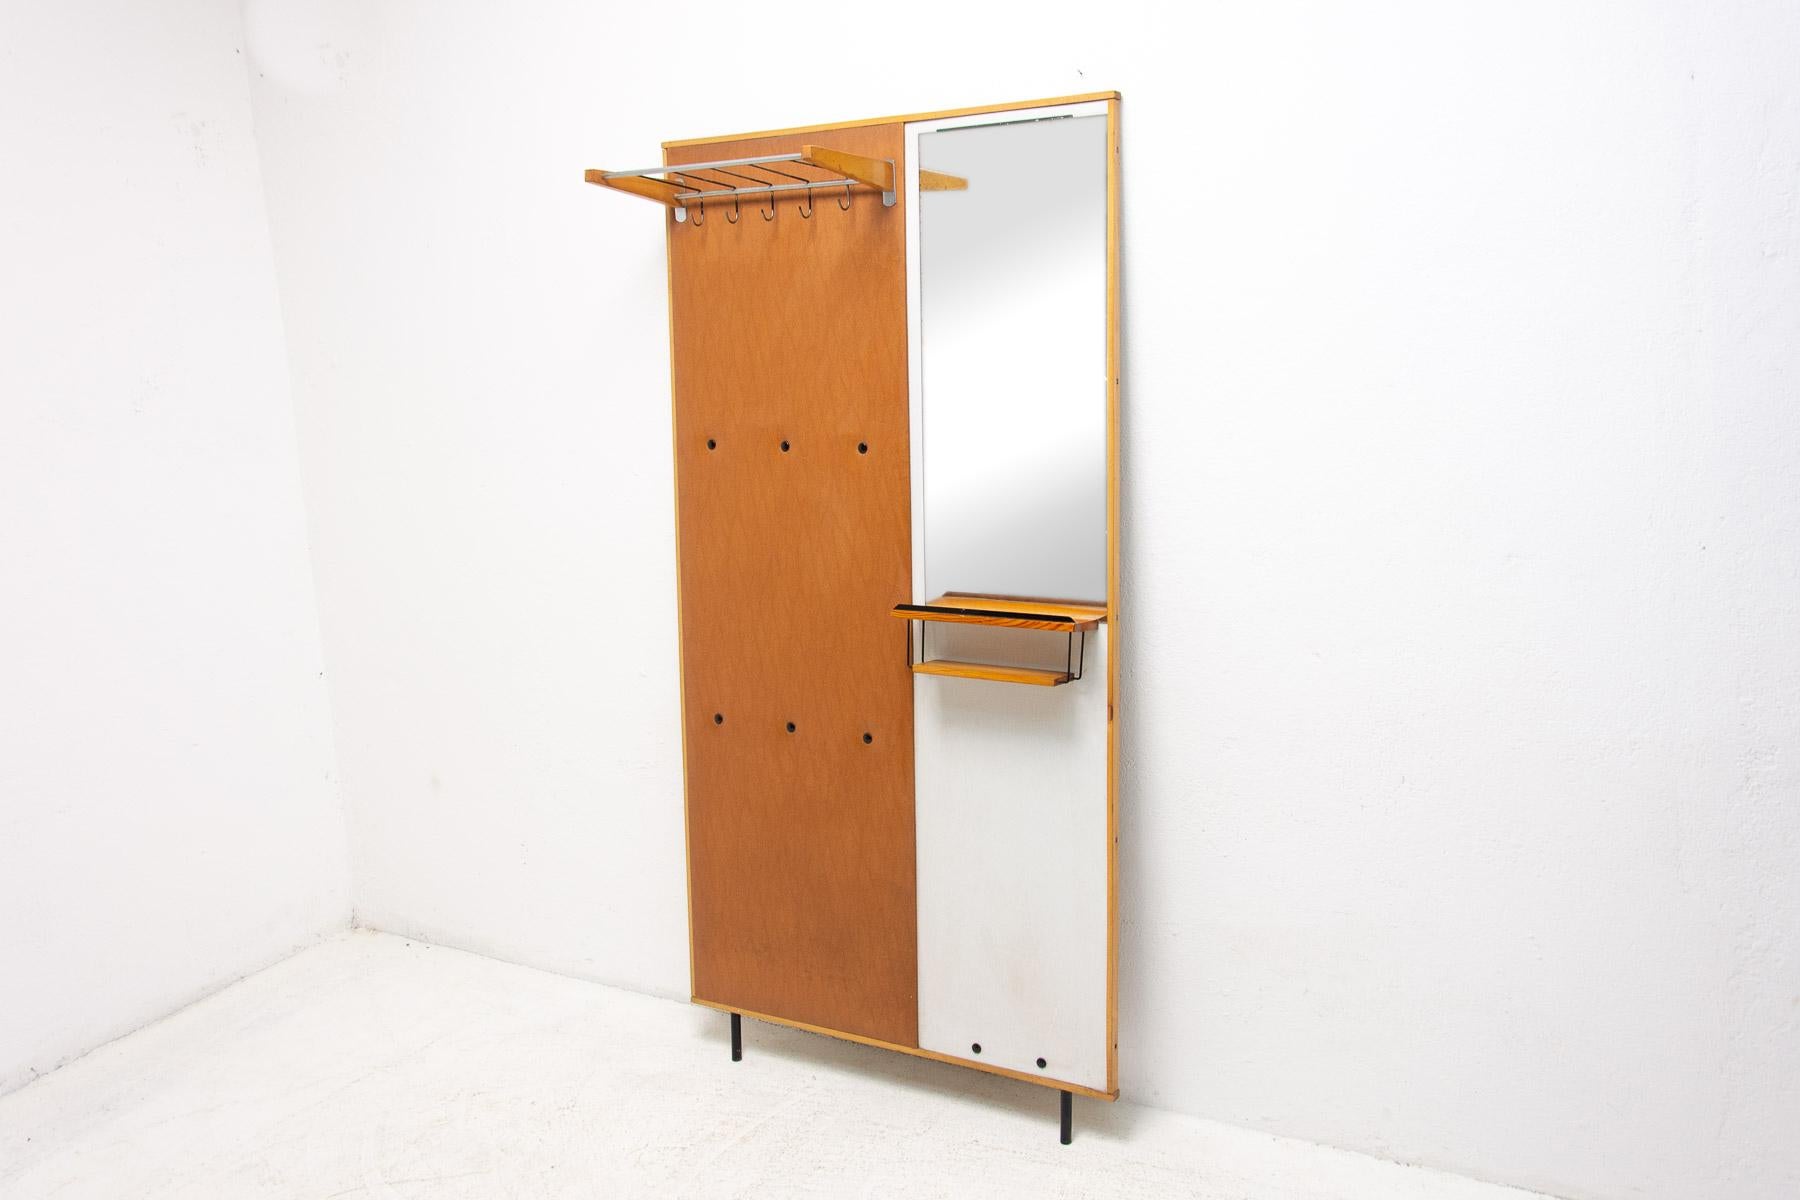 This hall coat rack was made in the former Czechoslovakia in the 1960s and produced by DREVOTVAR. Material: plywood, wood, leatherette, metal. It can be mounted on the wall or laid freely on the floor.

It is a characteristic example of